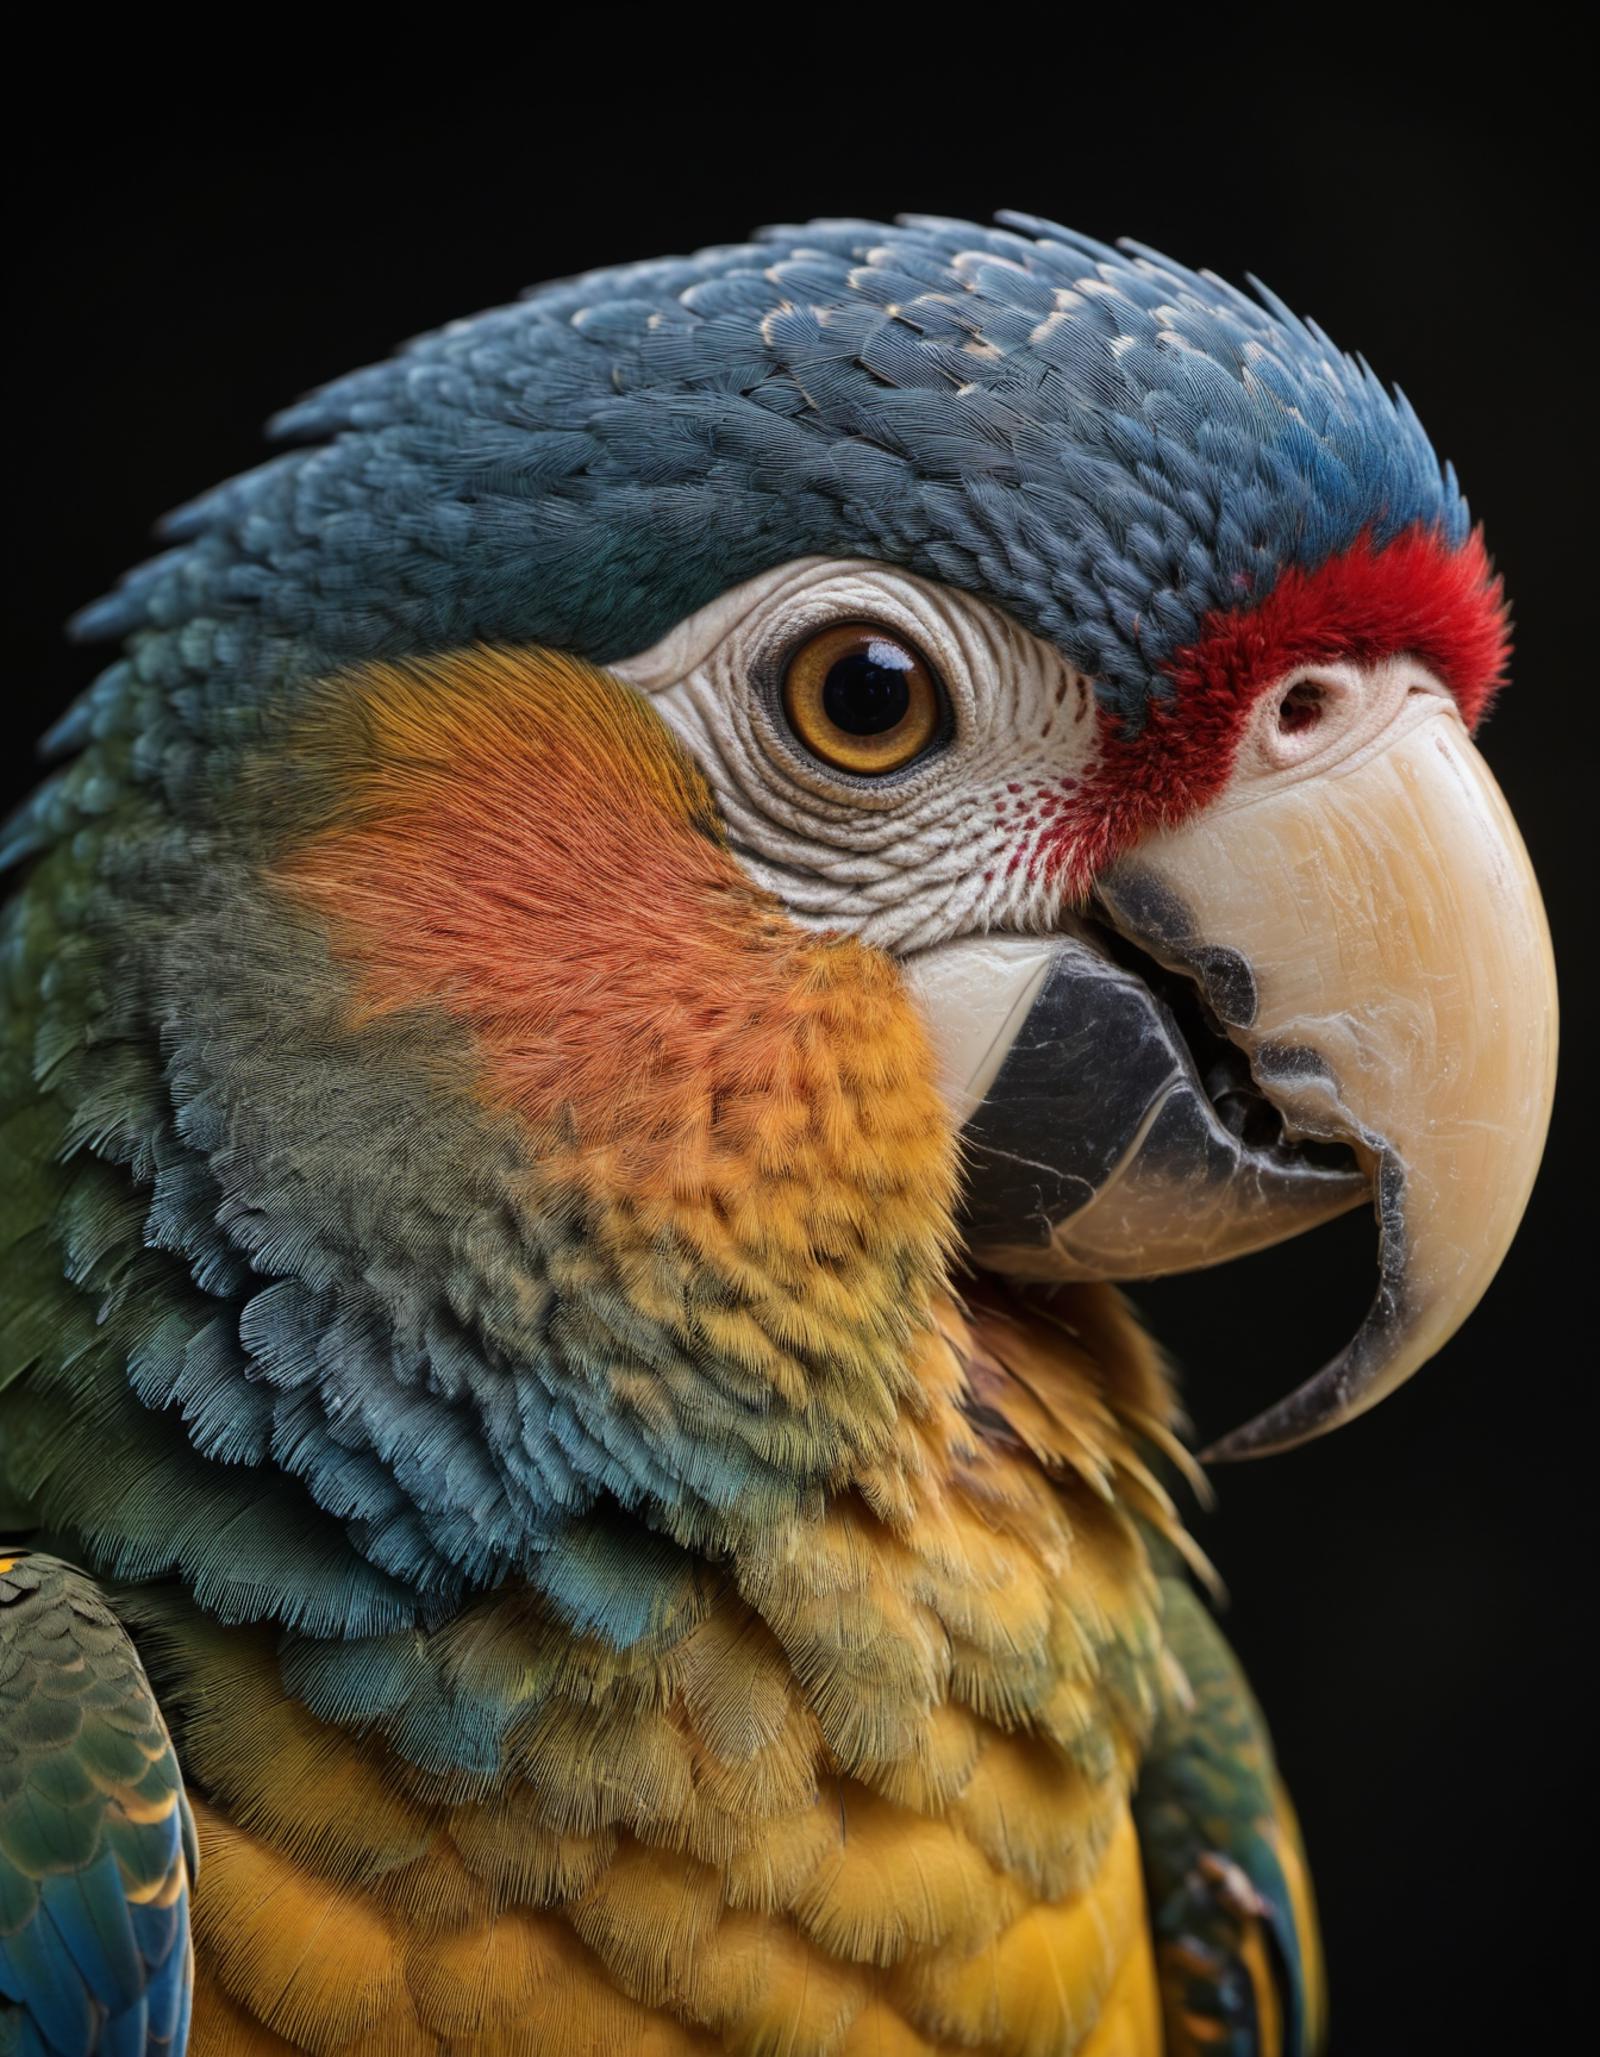 A close-up of a colorful parrot with a blue head and a red, black and white beak.